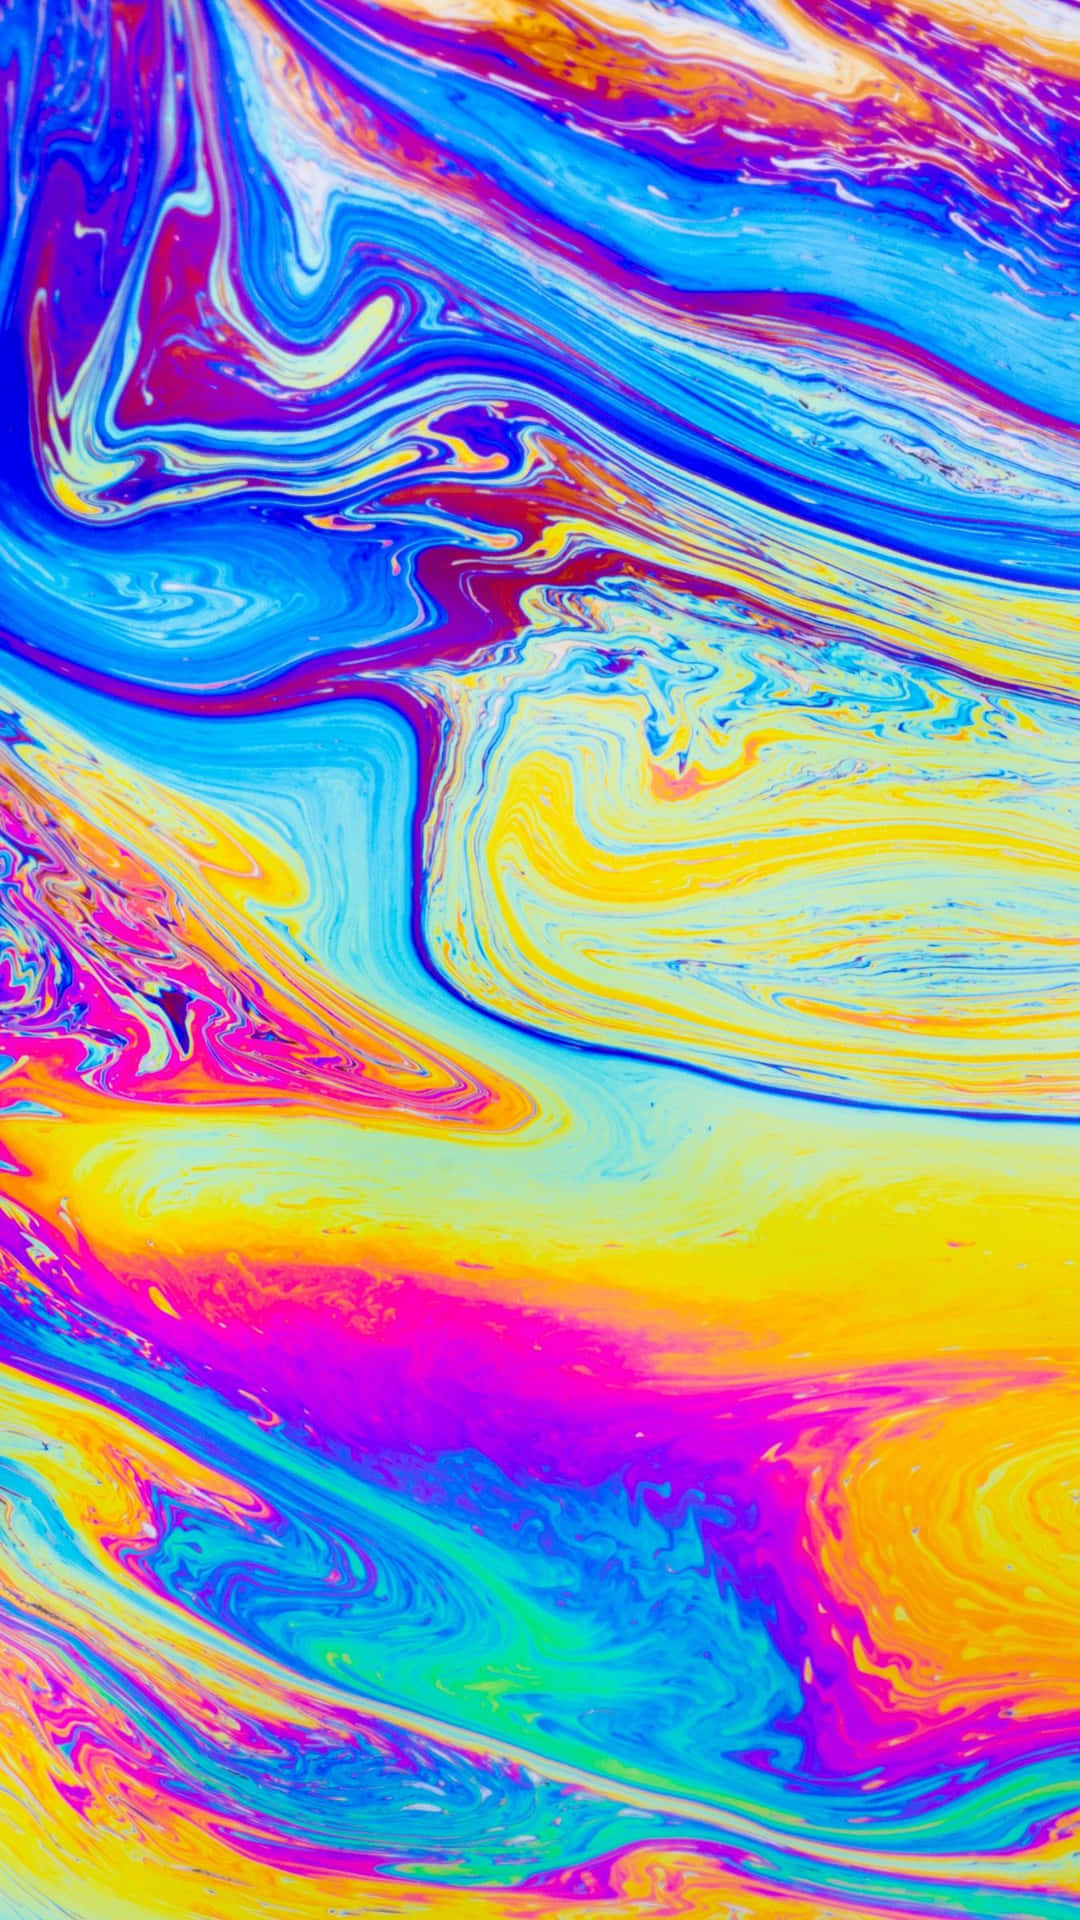 A Colorful Abstract Painting With Swirls Of Liquid Background